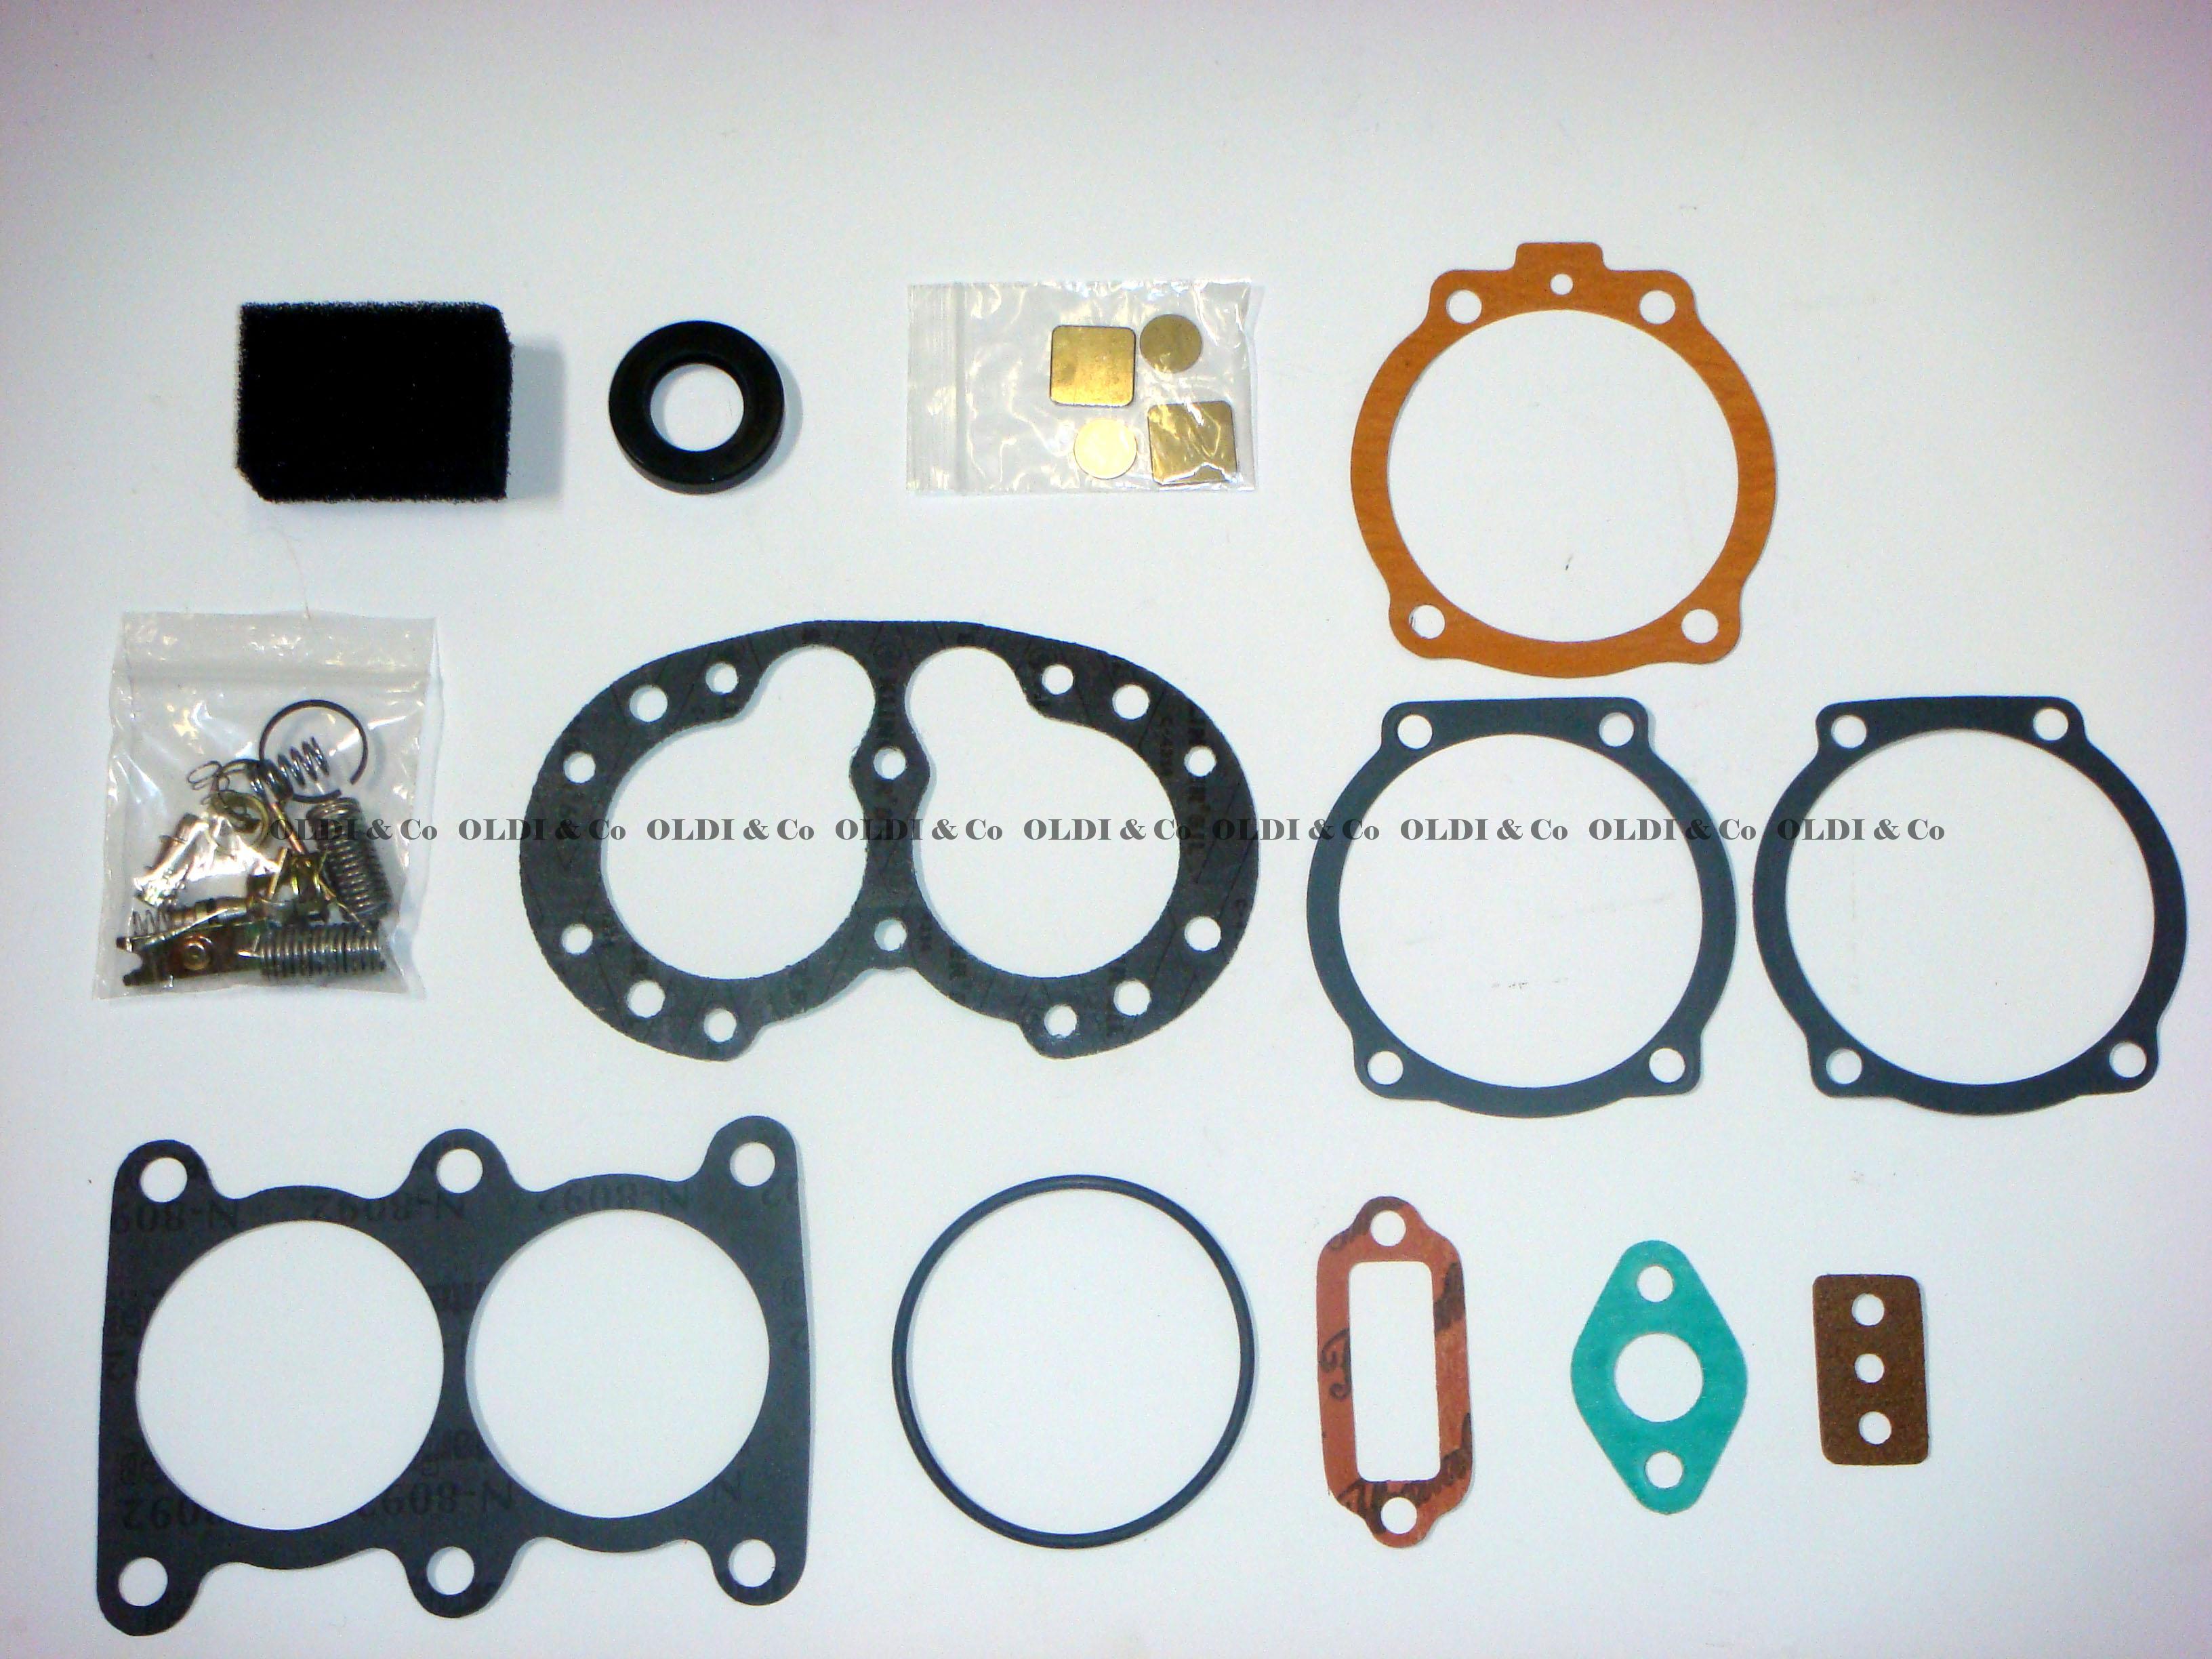 37.016.10097 Compressors and their components → Compressor repair kit